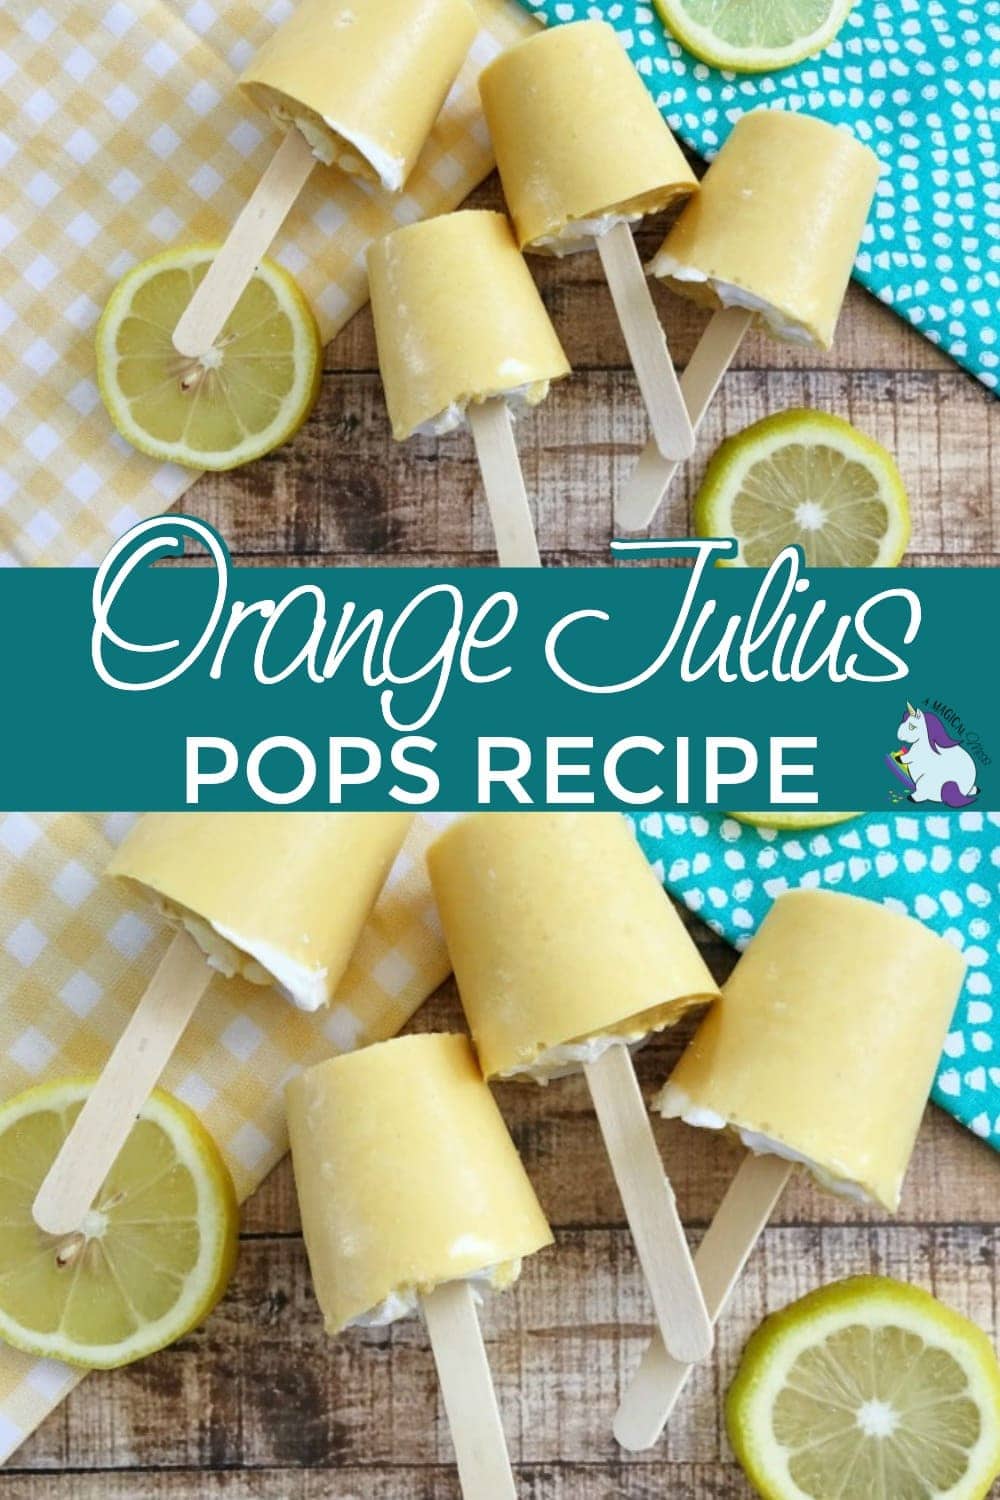 Homemade orang Julius pops on a table